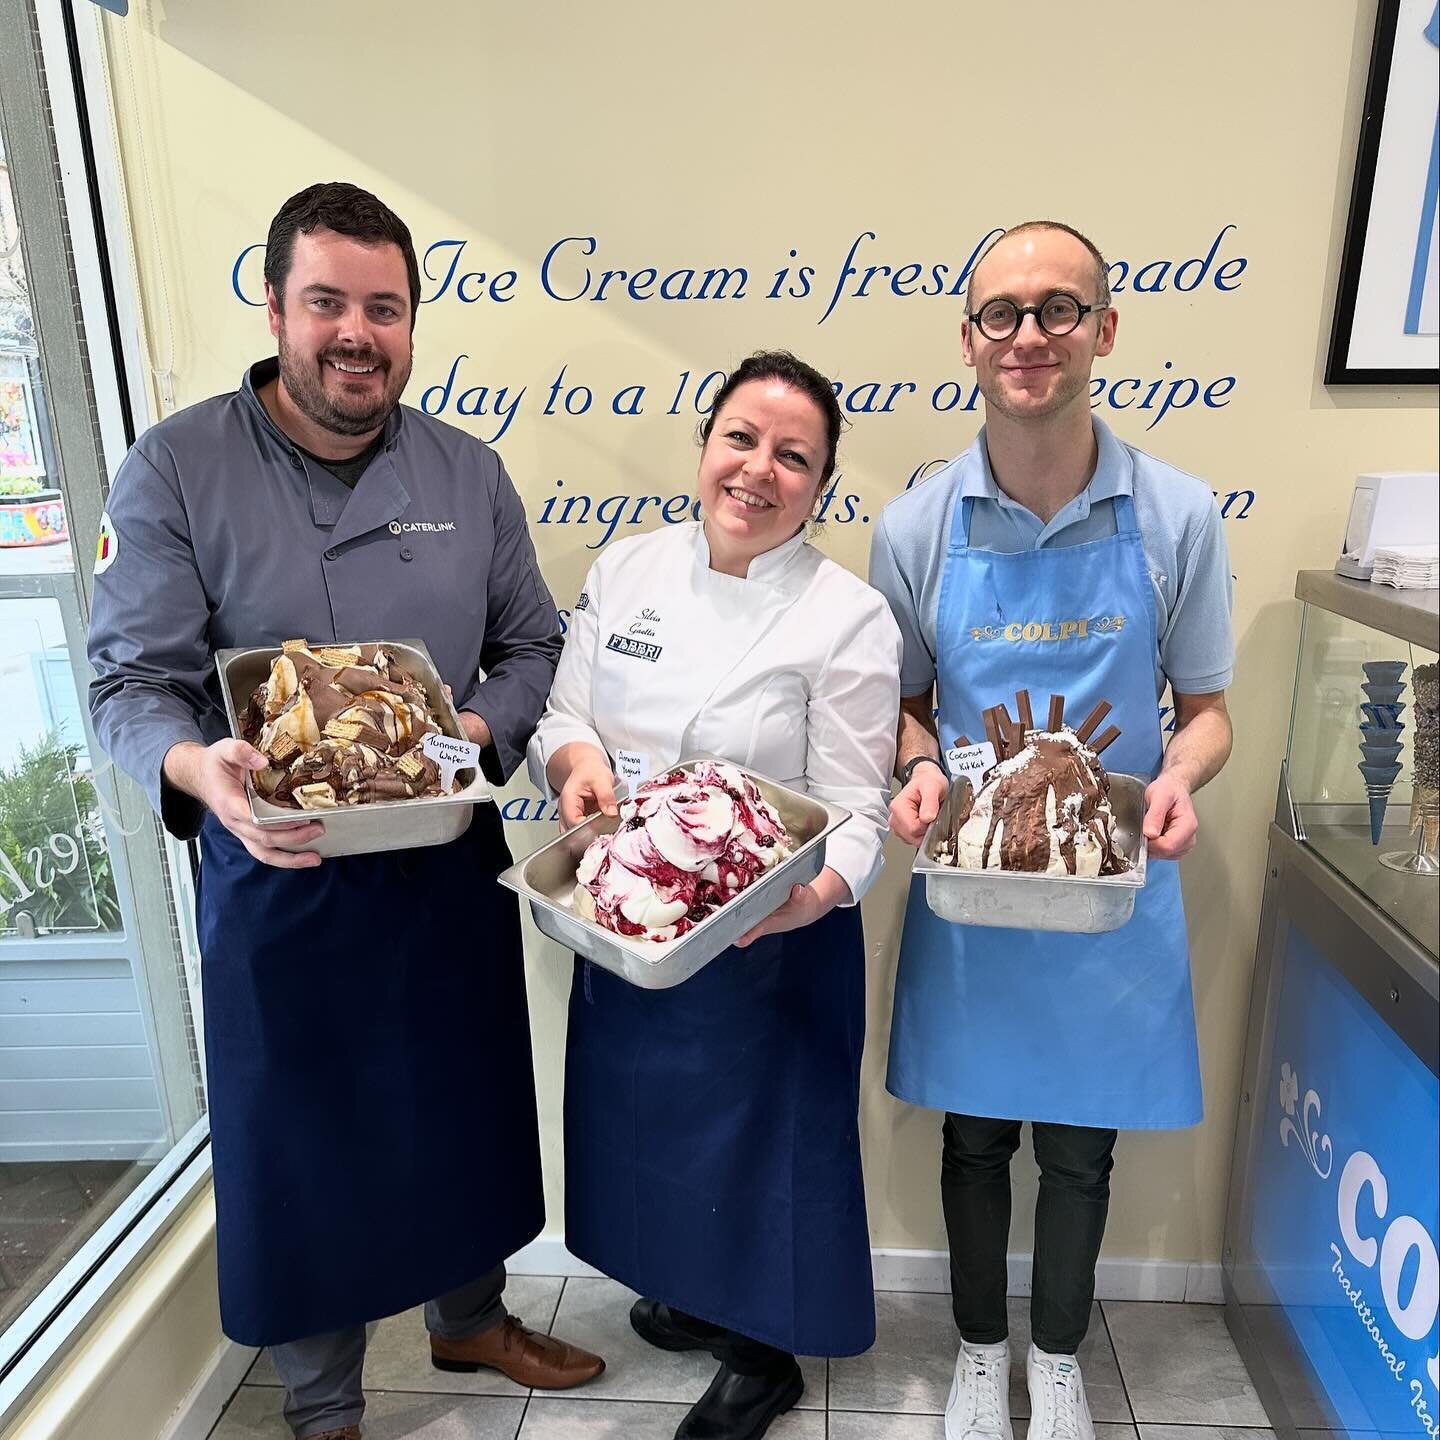 We were joined this morning by Michael (@caterlinkltd_scotland) and Silvia (@silviagaetta, @fabbri1905) for a gelato Masterclass. Huge thanks for all the tips.

Some mega new flavours coming your way Milngavie. These have all been made today. Once th